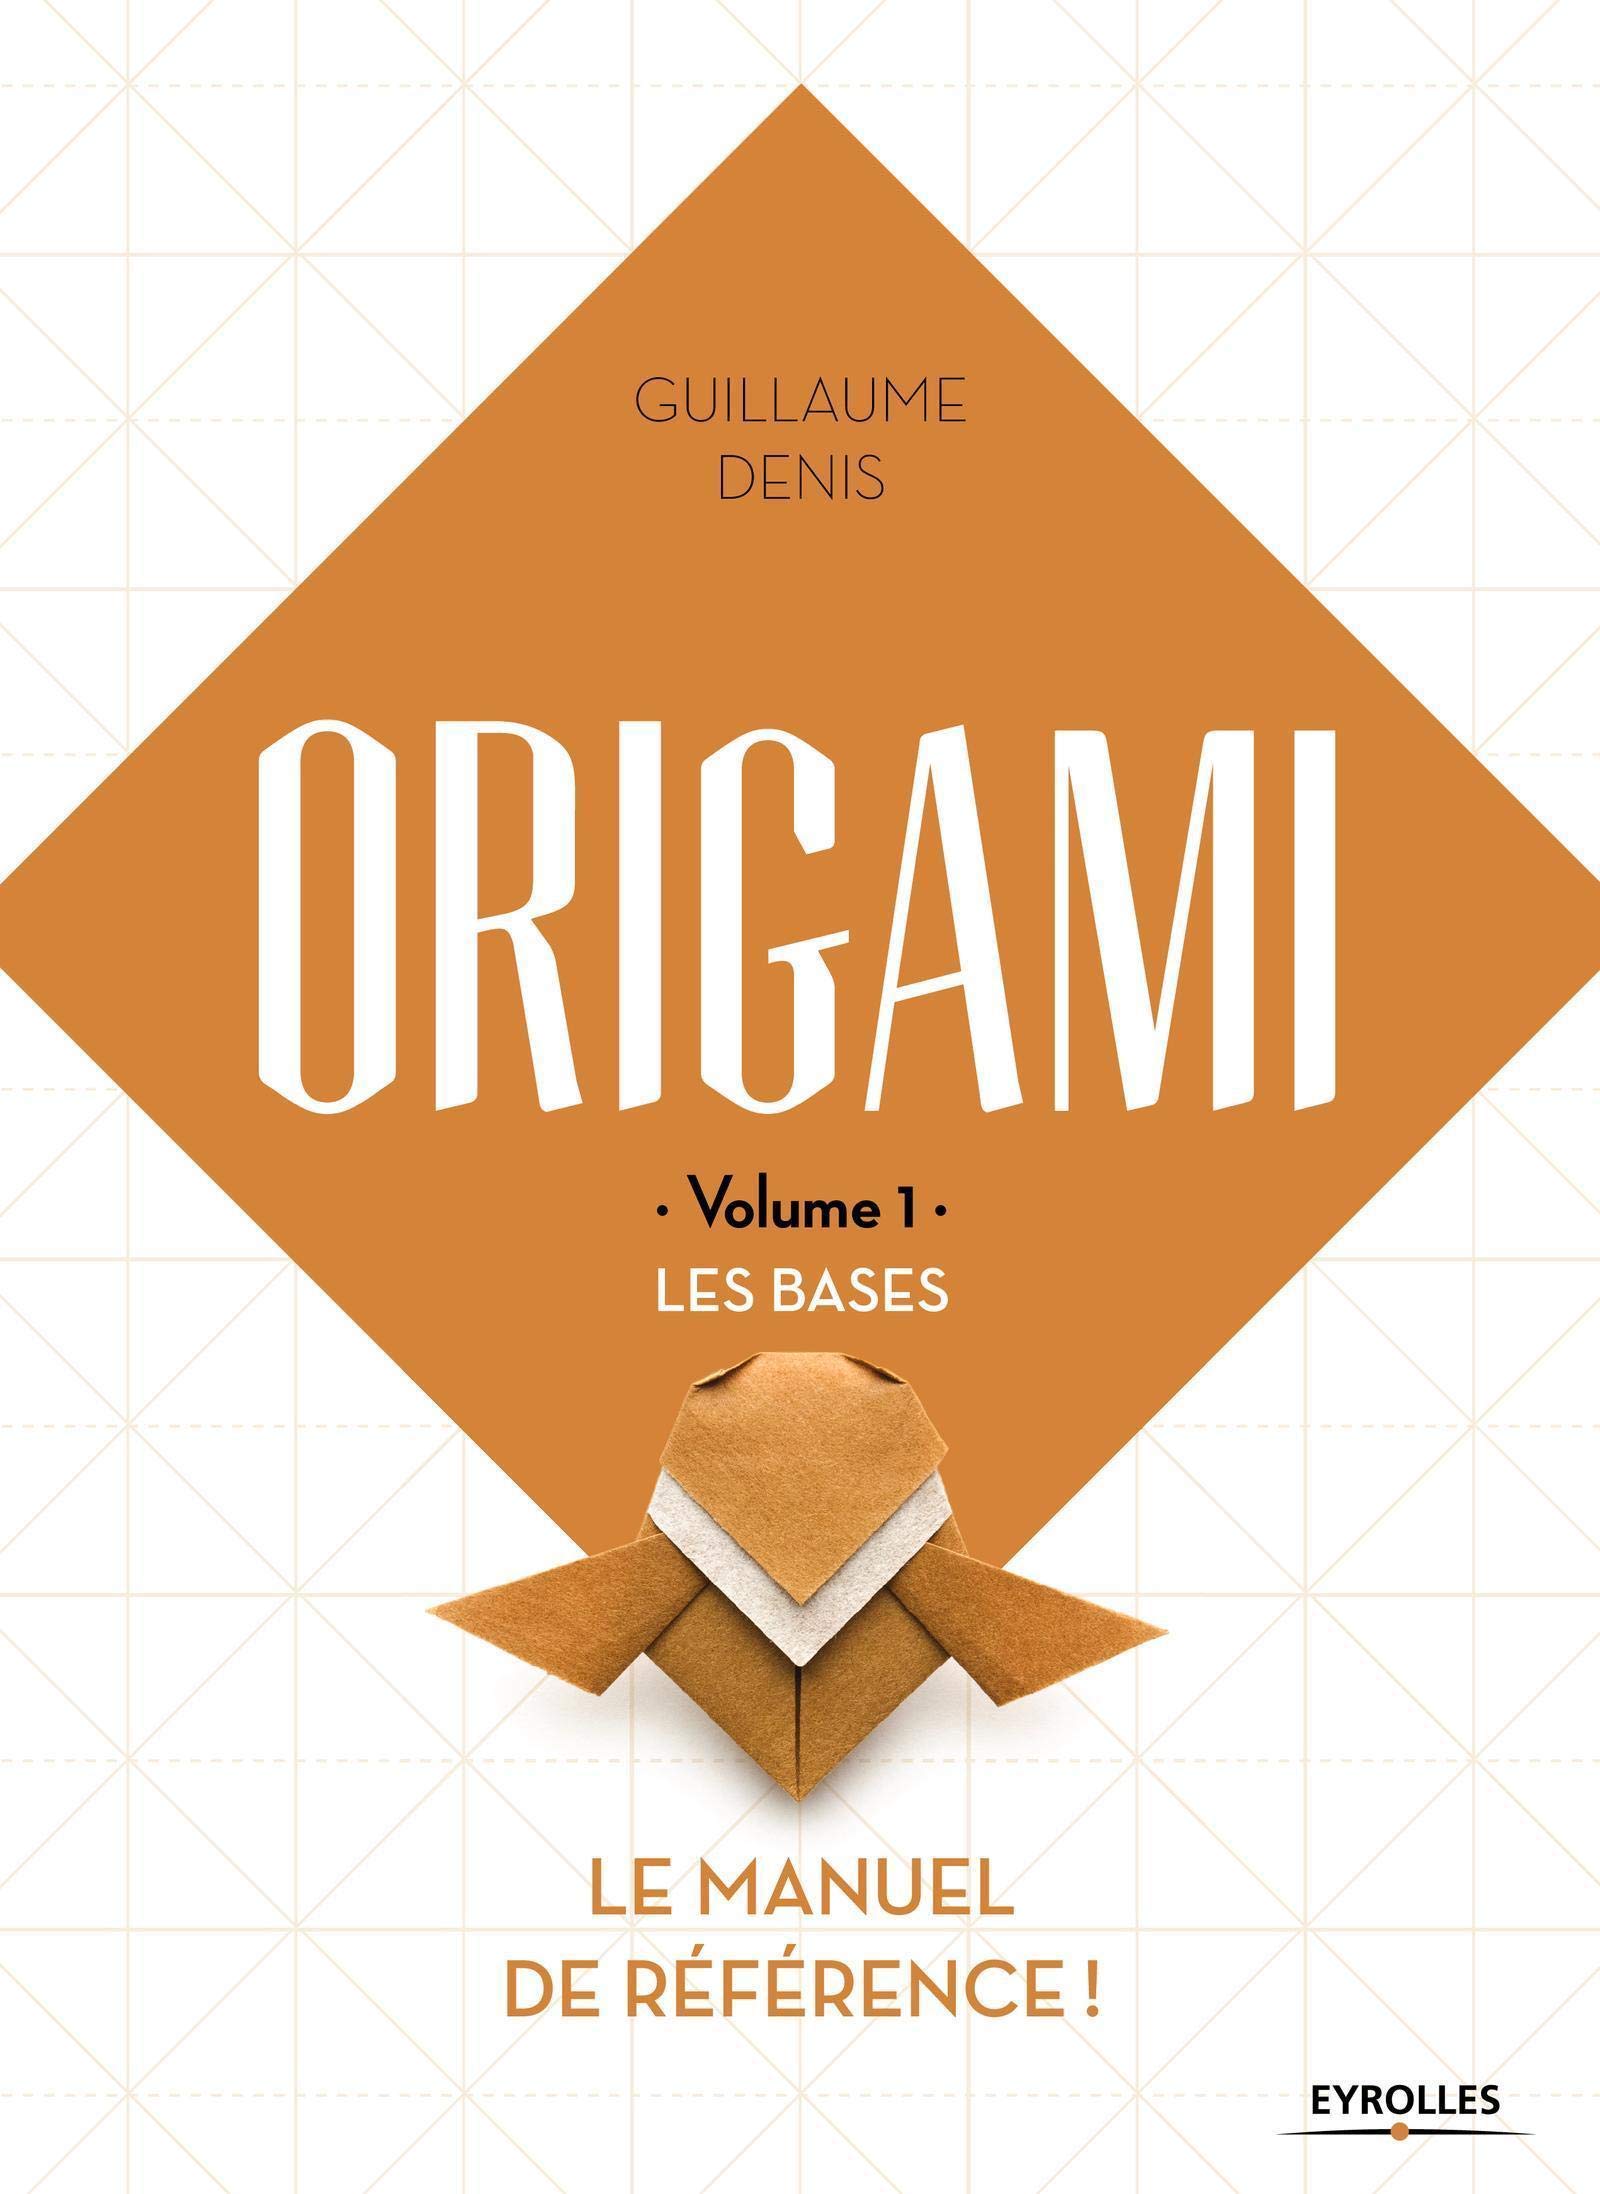 ORIGAMI - Volume 1 - LES BASES : page 98.